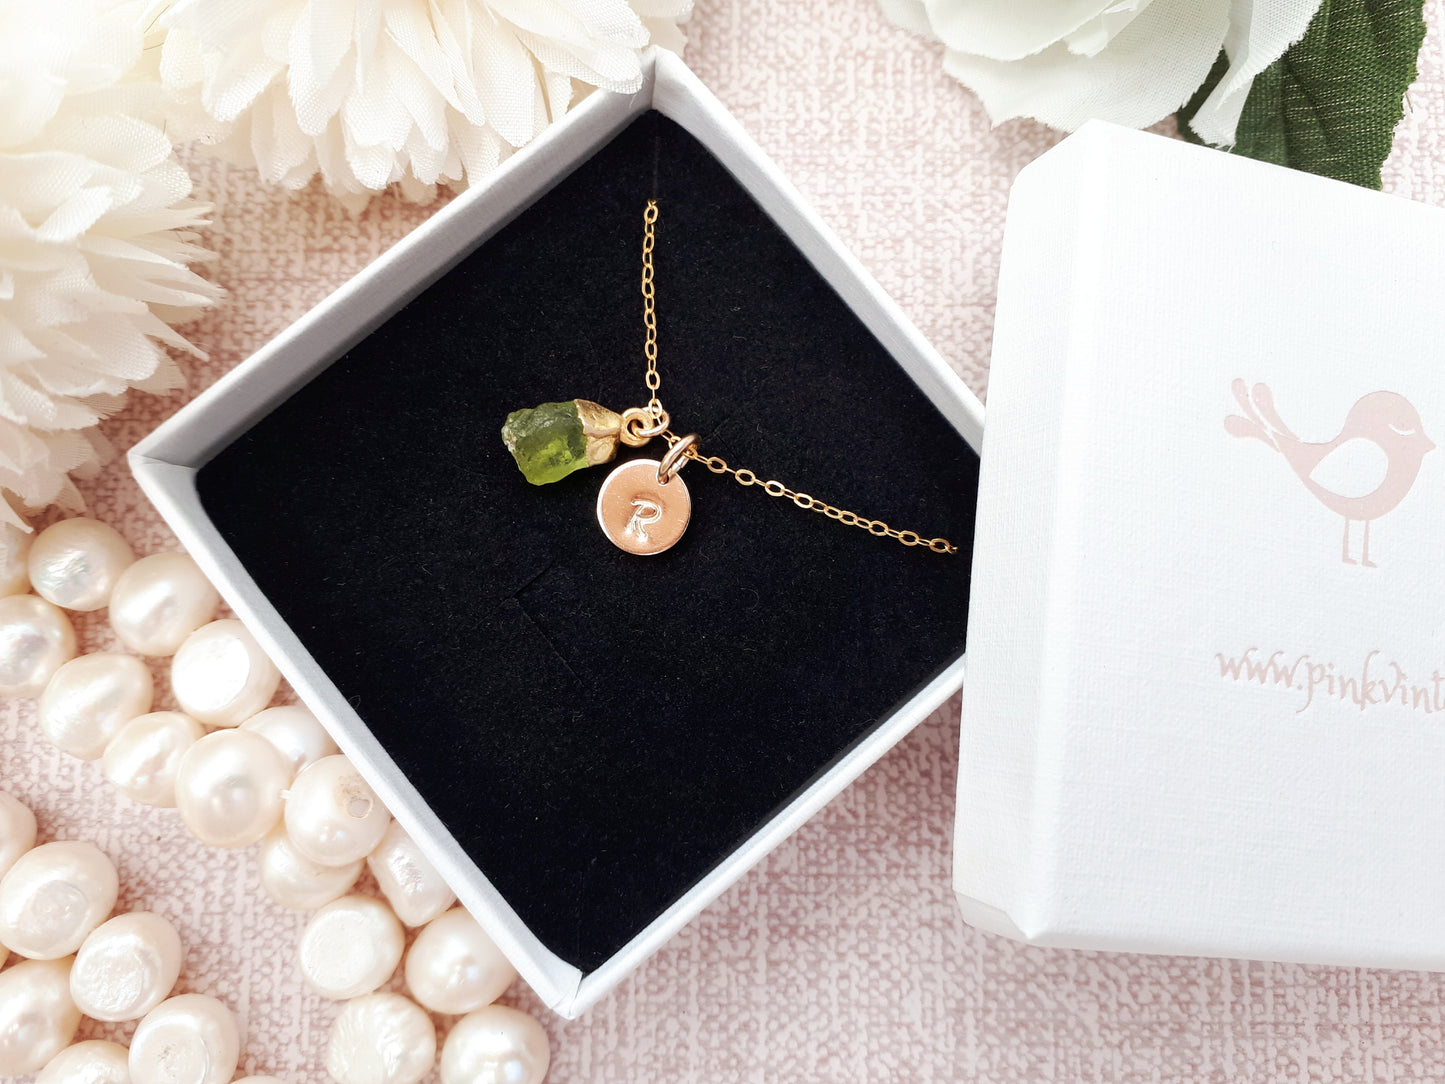 Personalised peridot necklace in gold.